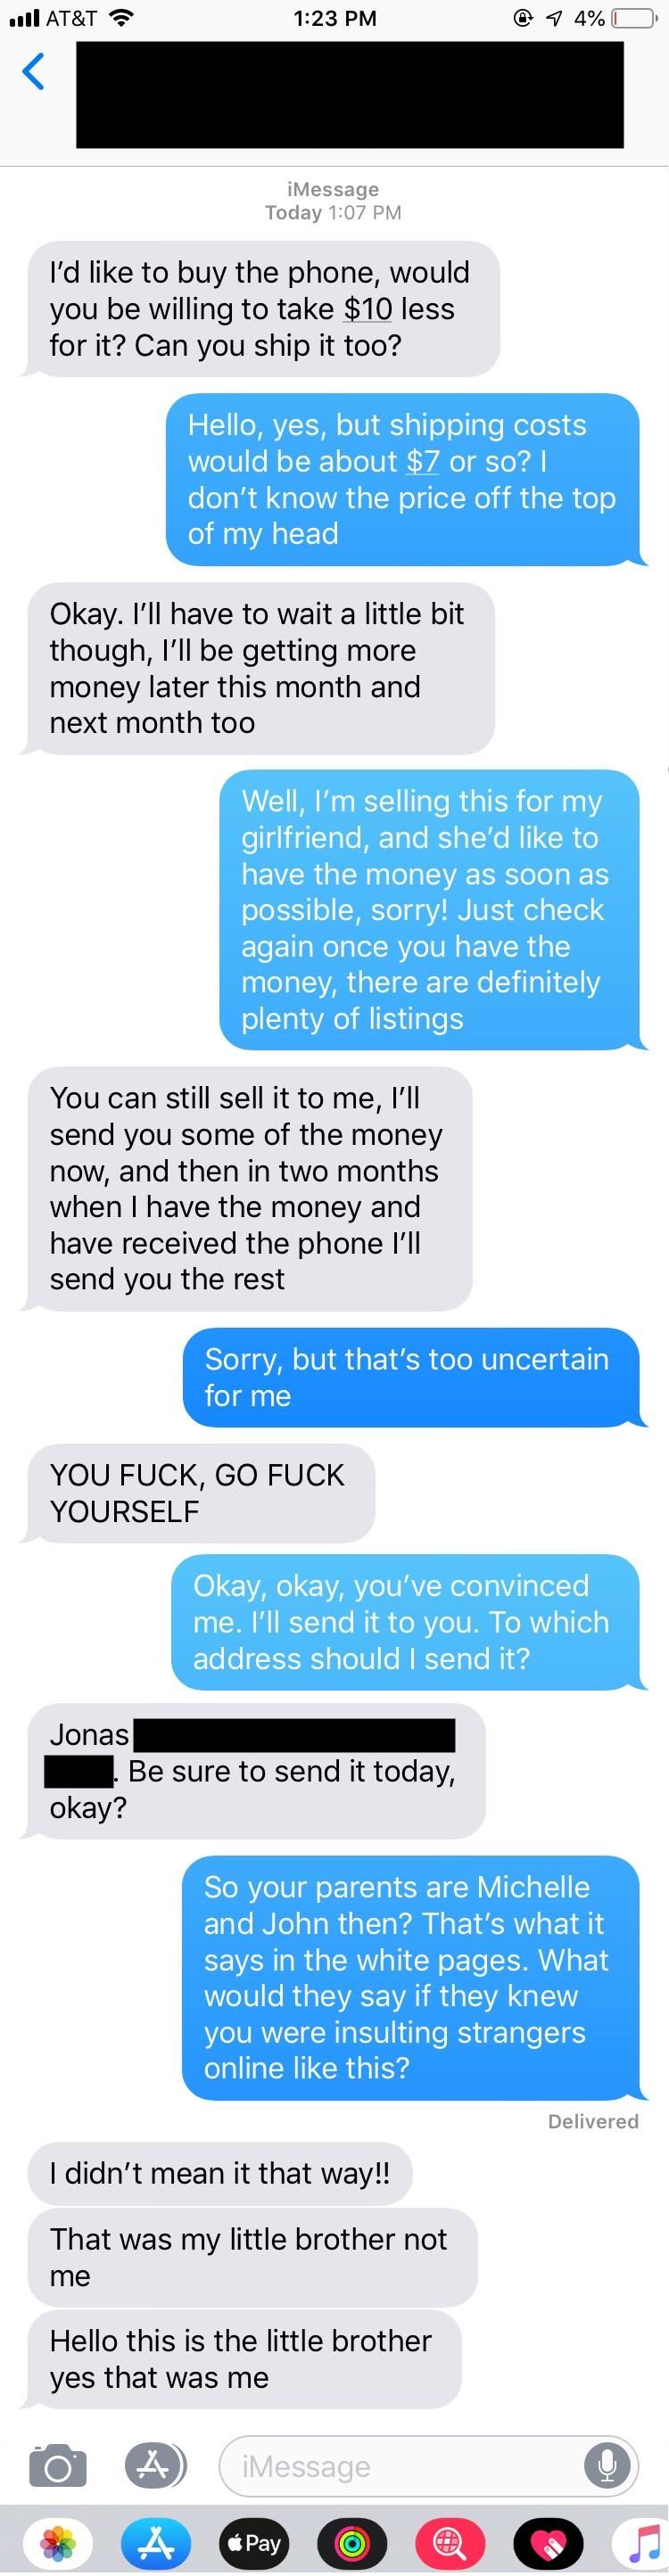 Selling a Samsung Galaxy S8 and this guy wanted to pay me next month